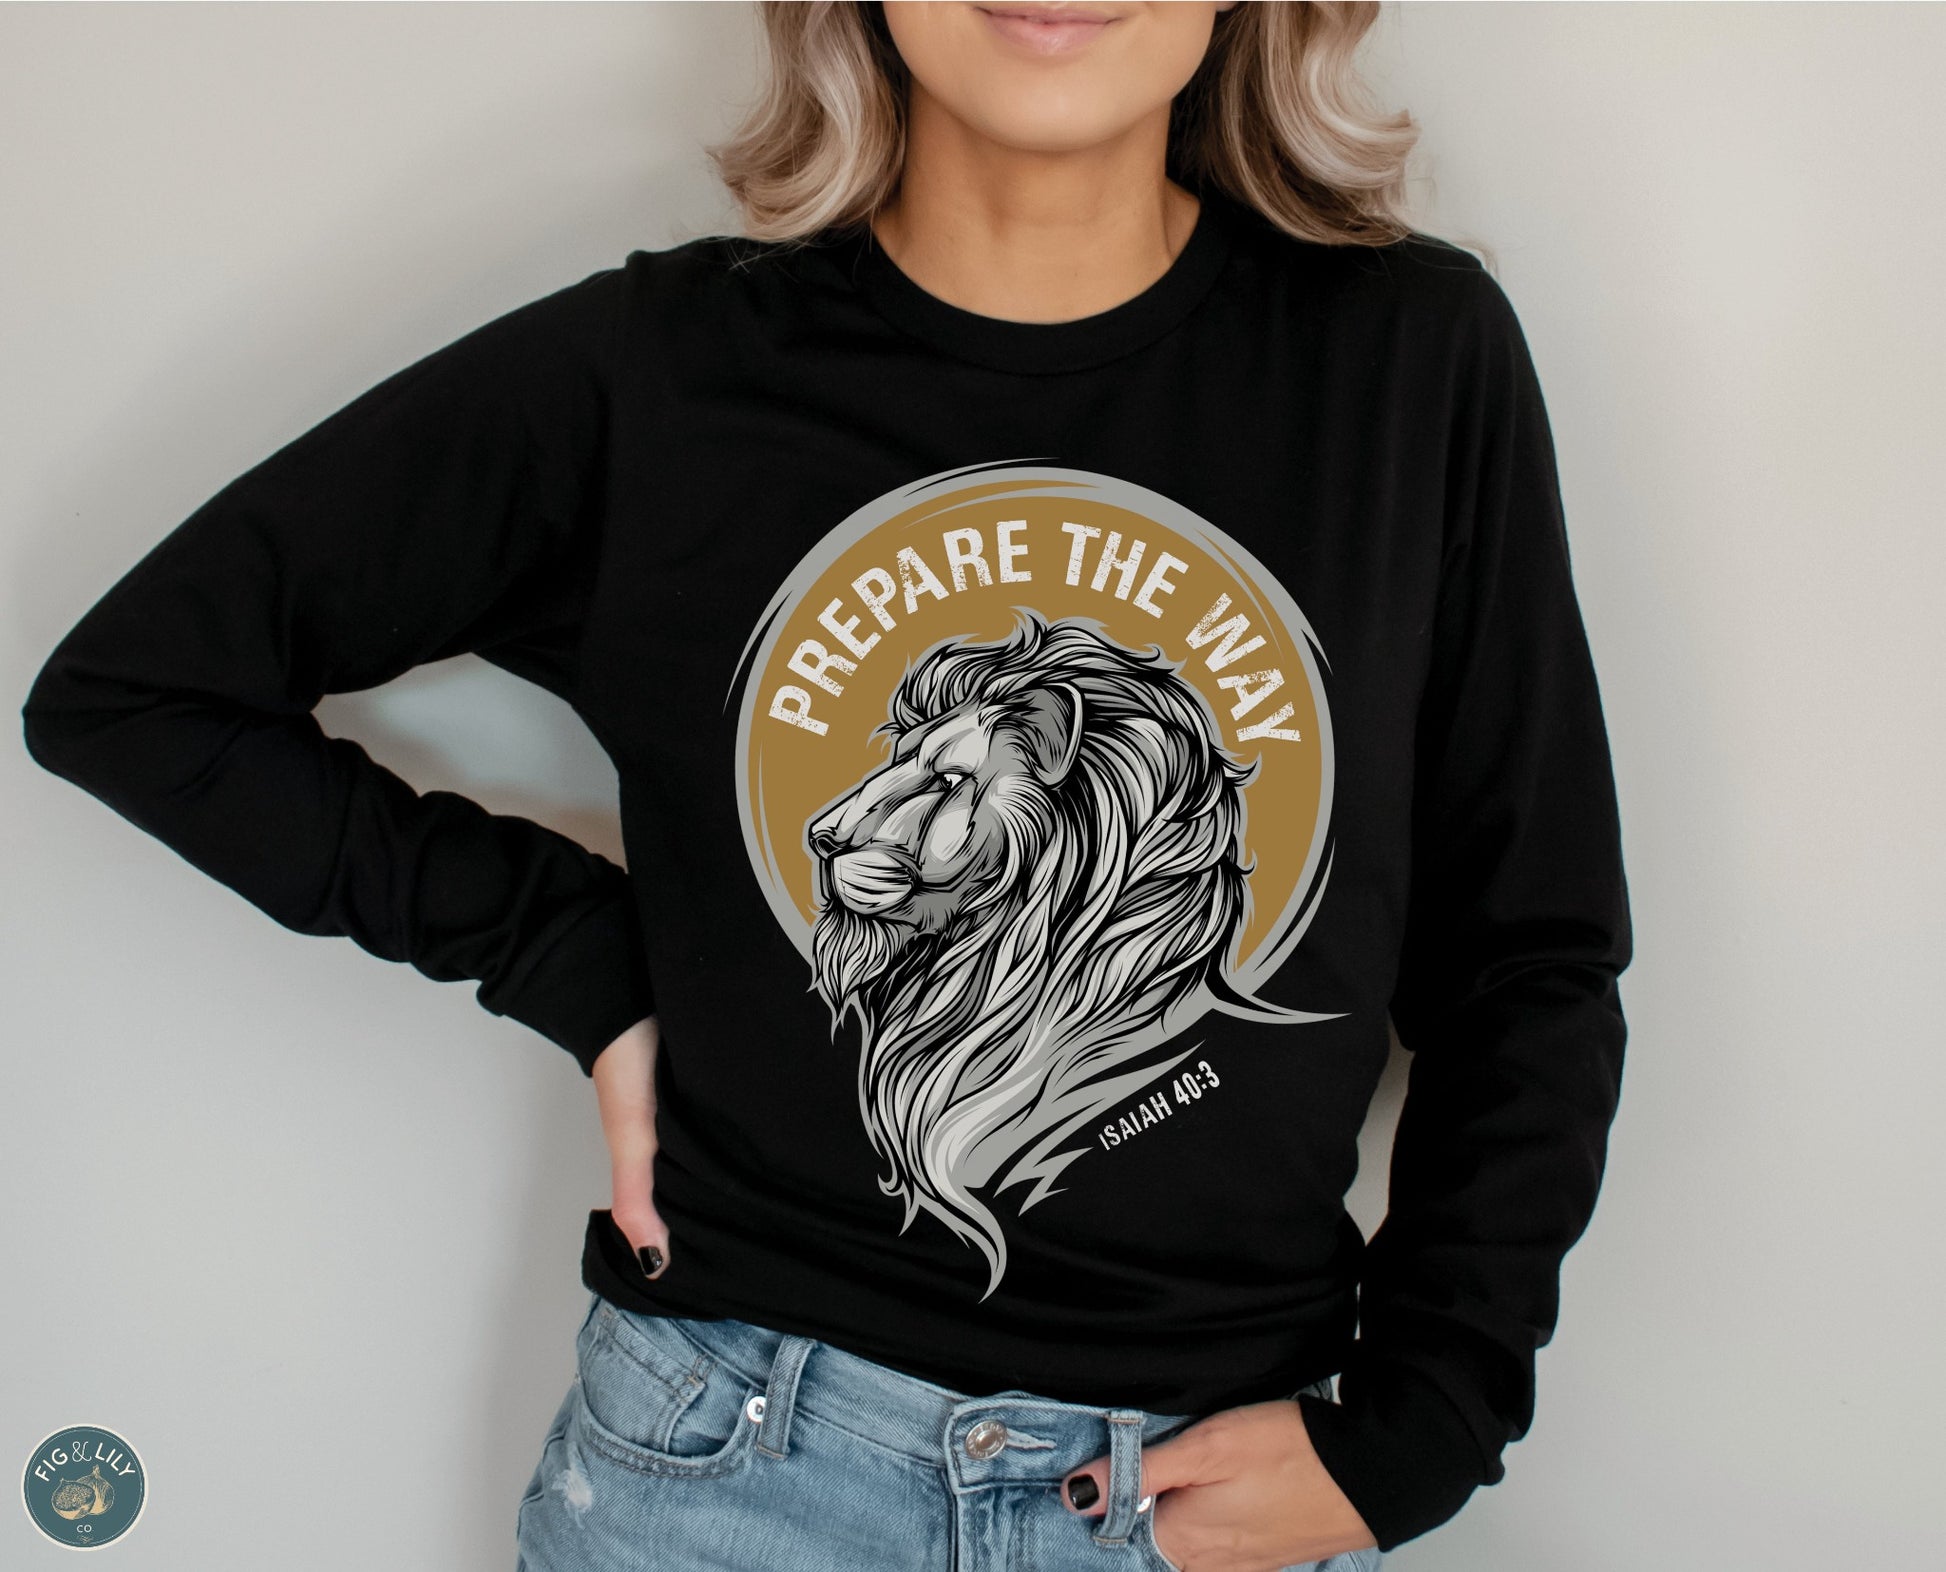 Lion of Judah Prepare the Way Isaiah 40:3 Christian aesthetic design printed in white and gold on black soft long sleeve tee for men & women